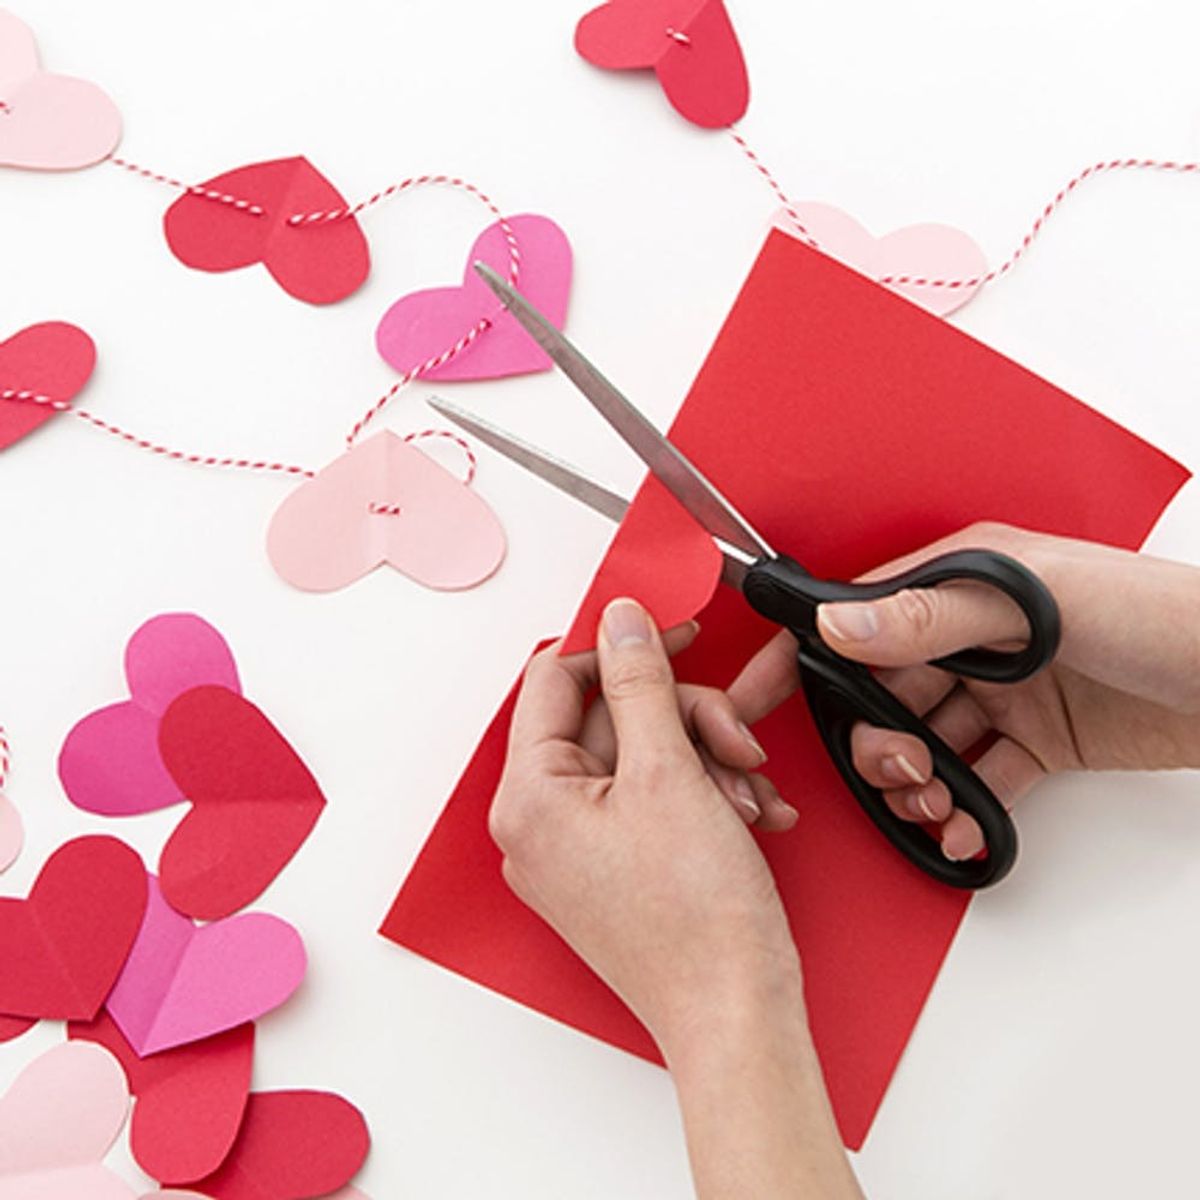 Share Your Best Valentine’s Day DIY and You Could Win $500!